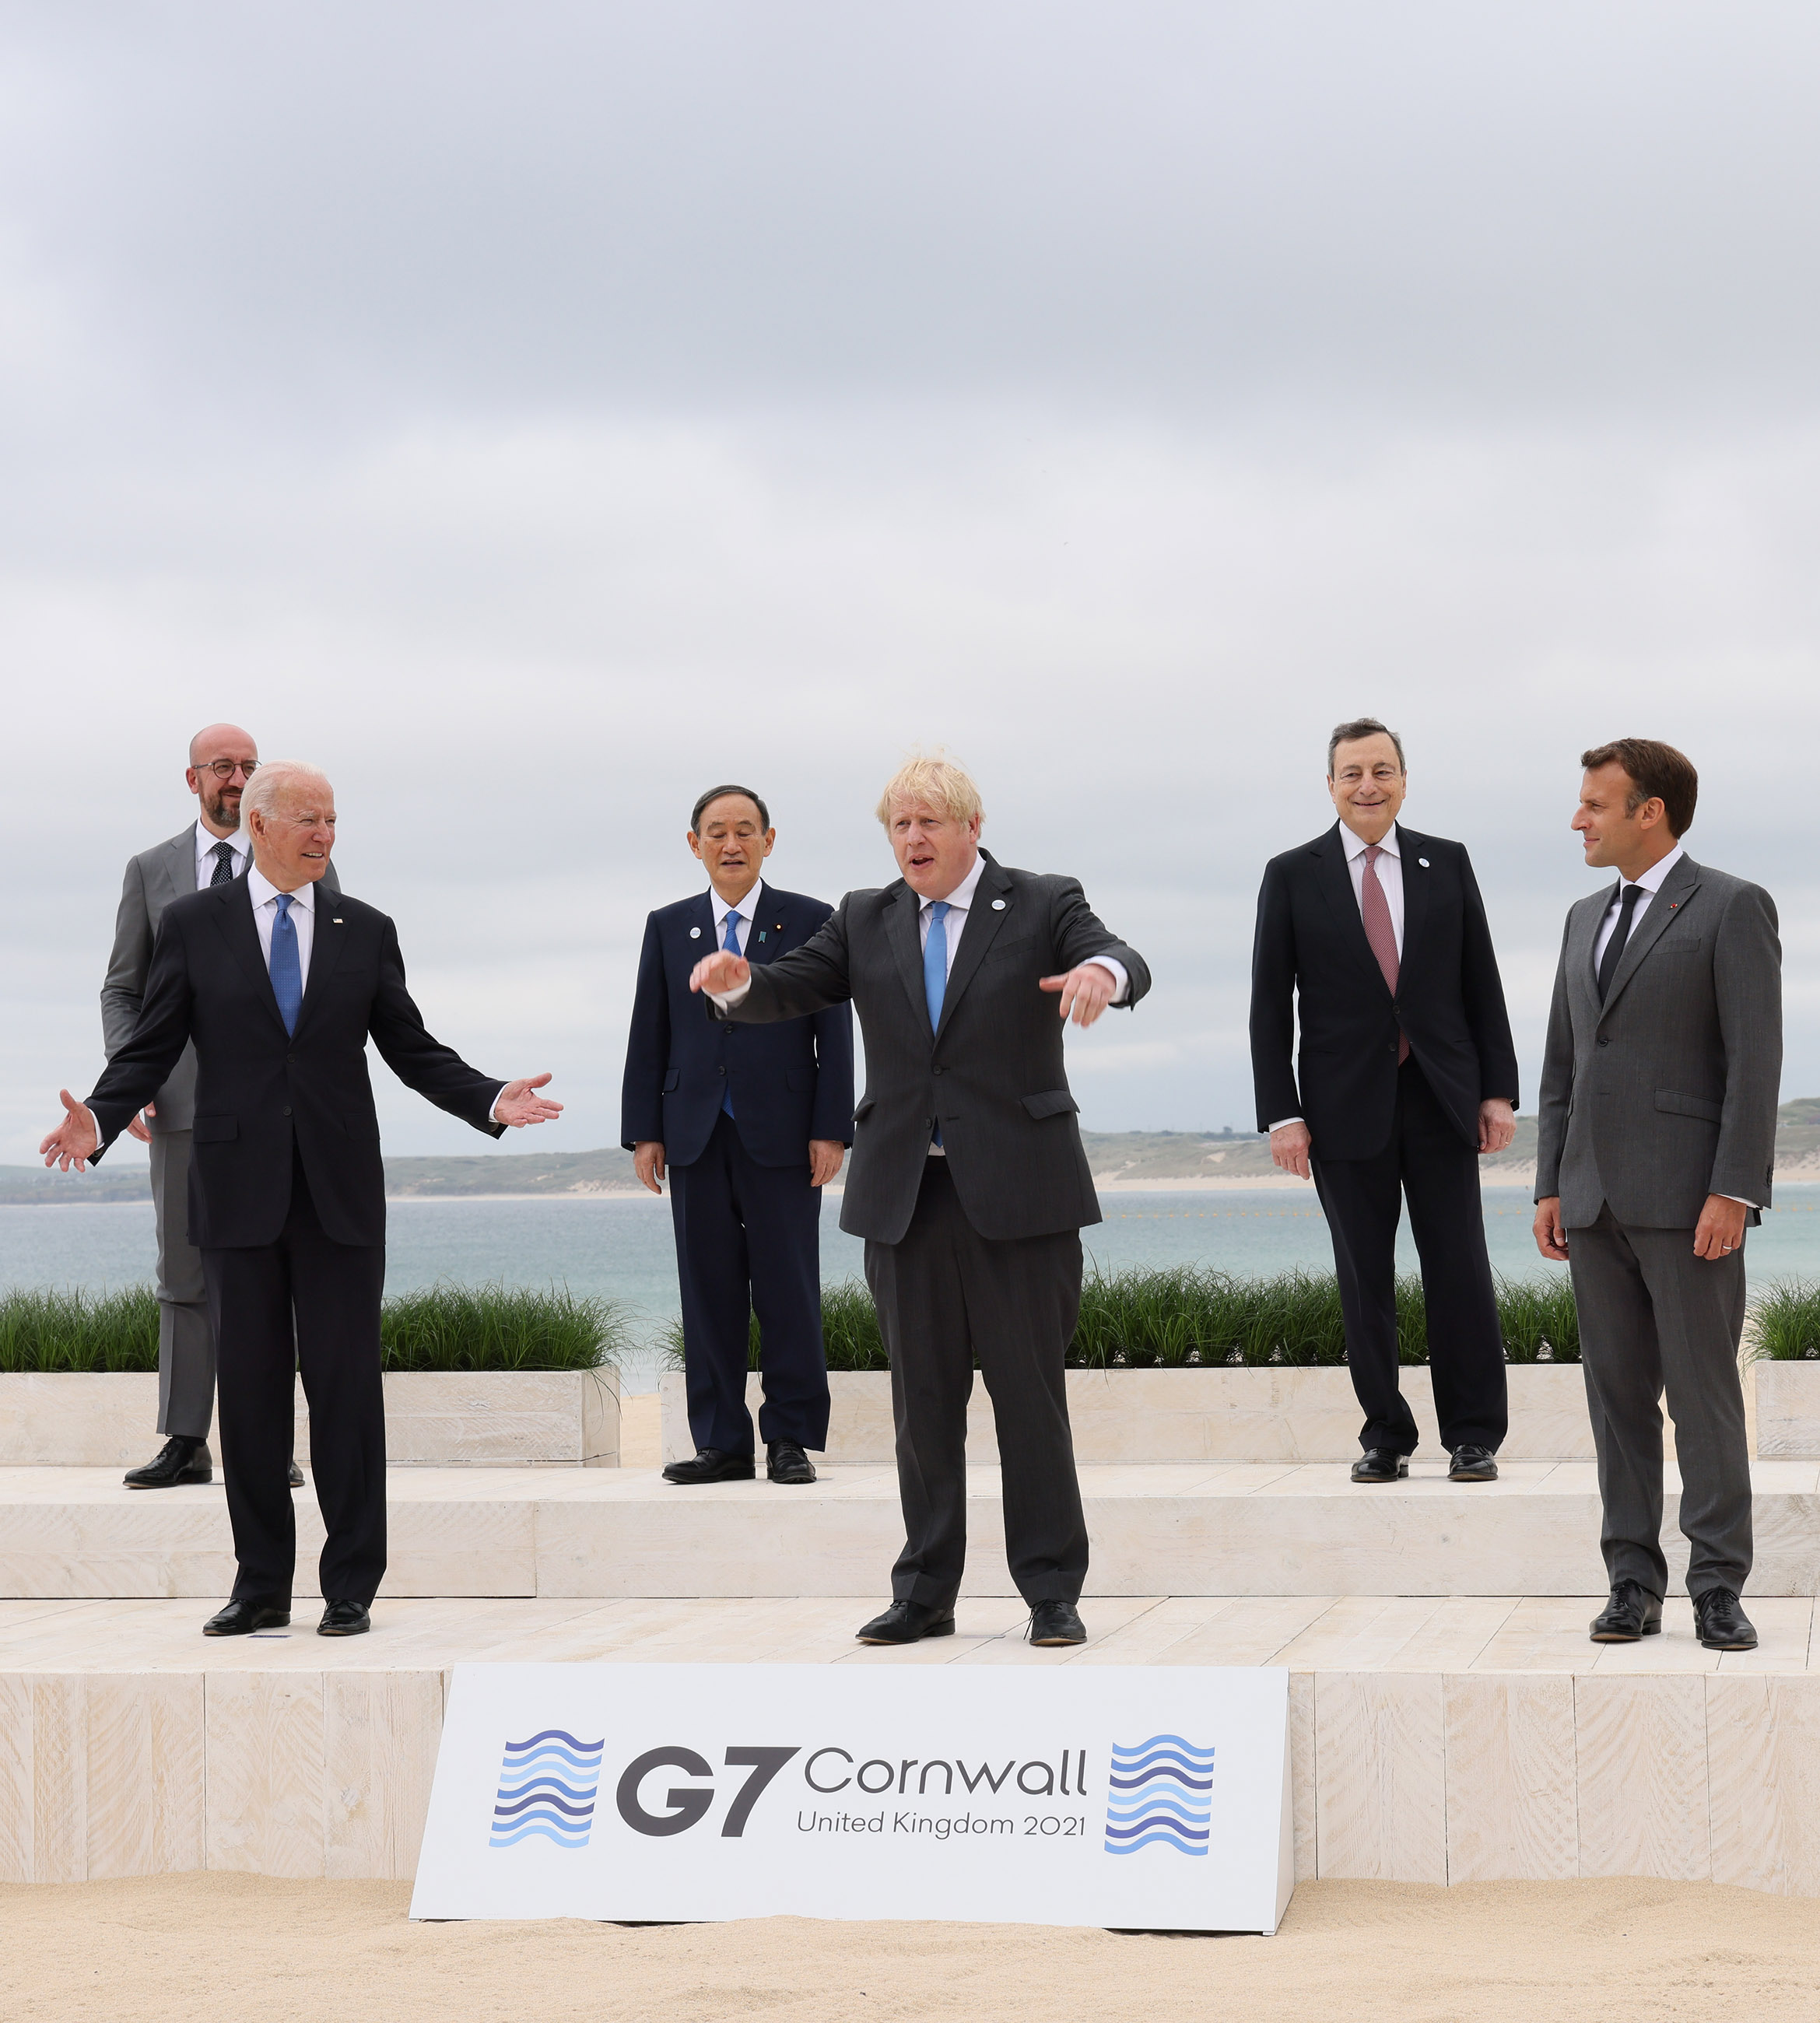 Photograph of the group photograph session with the leaders of the G7 members (3)